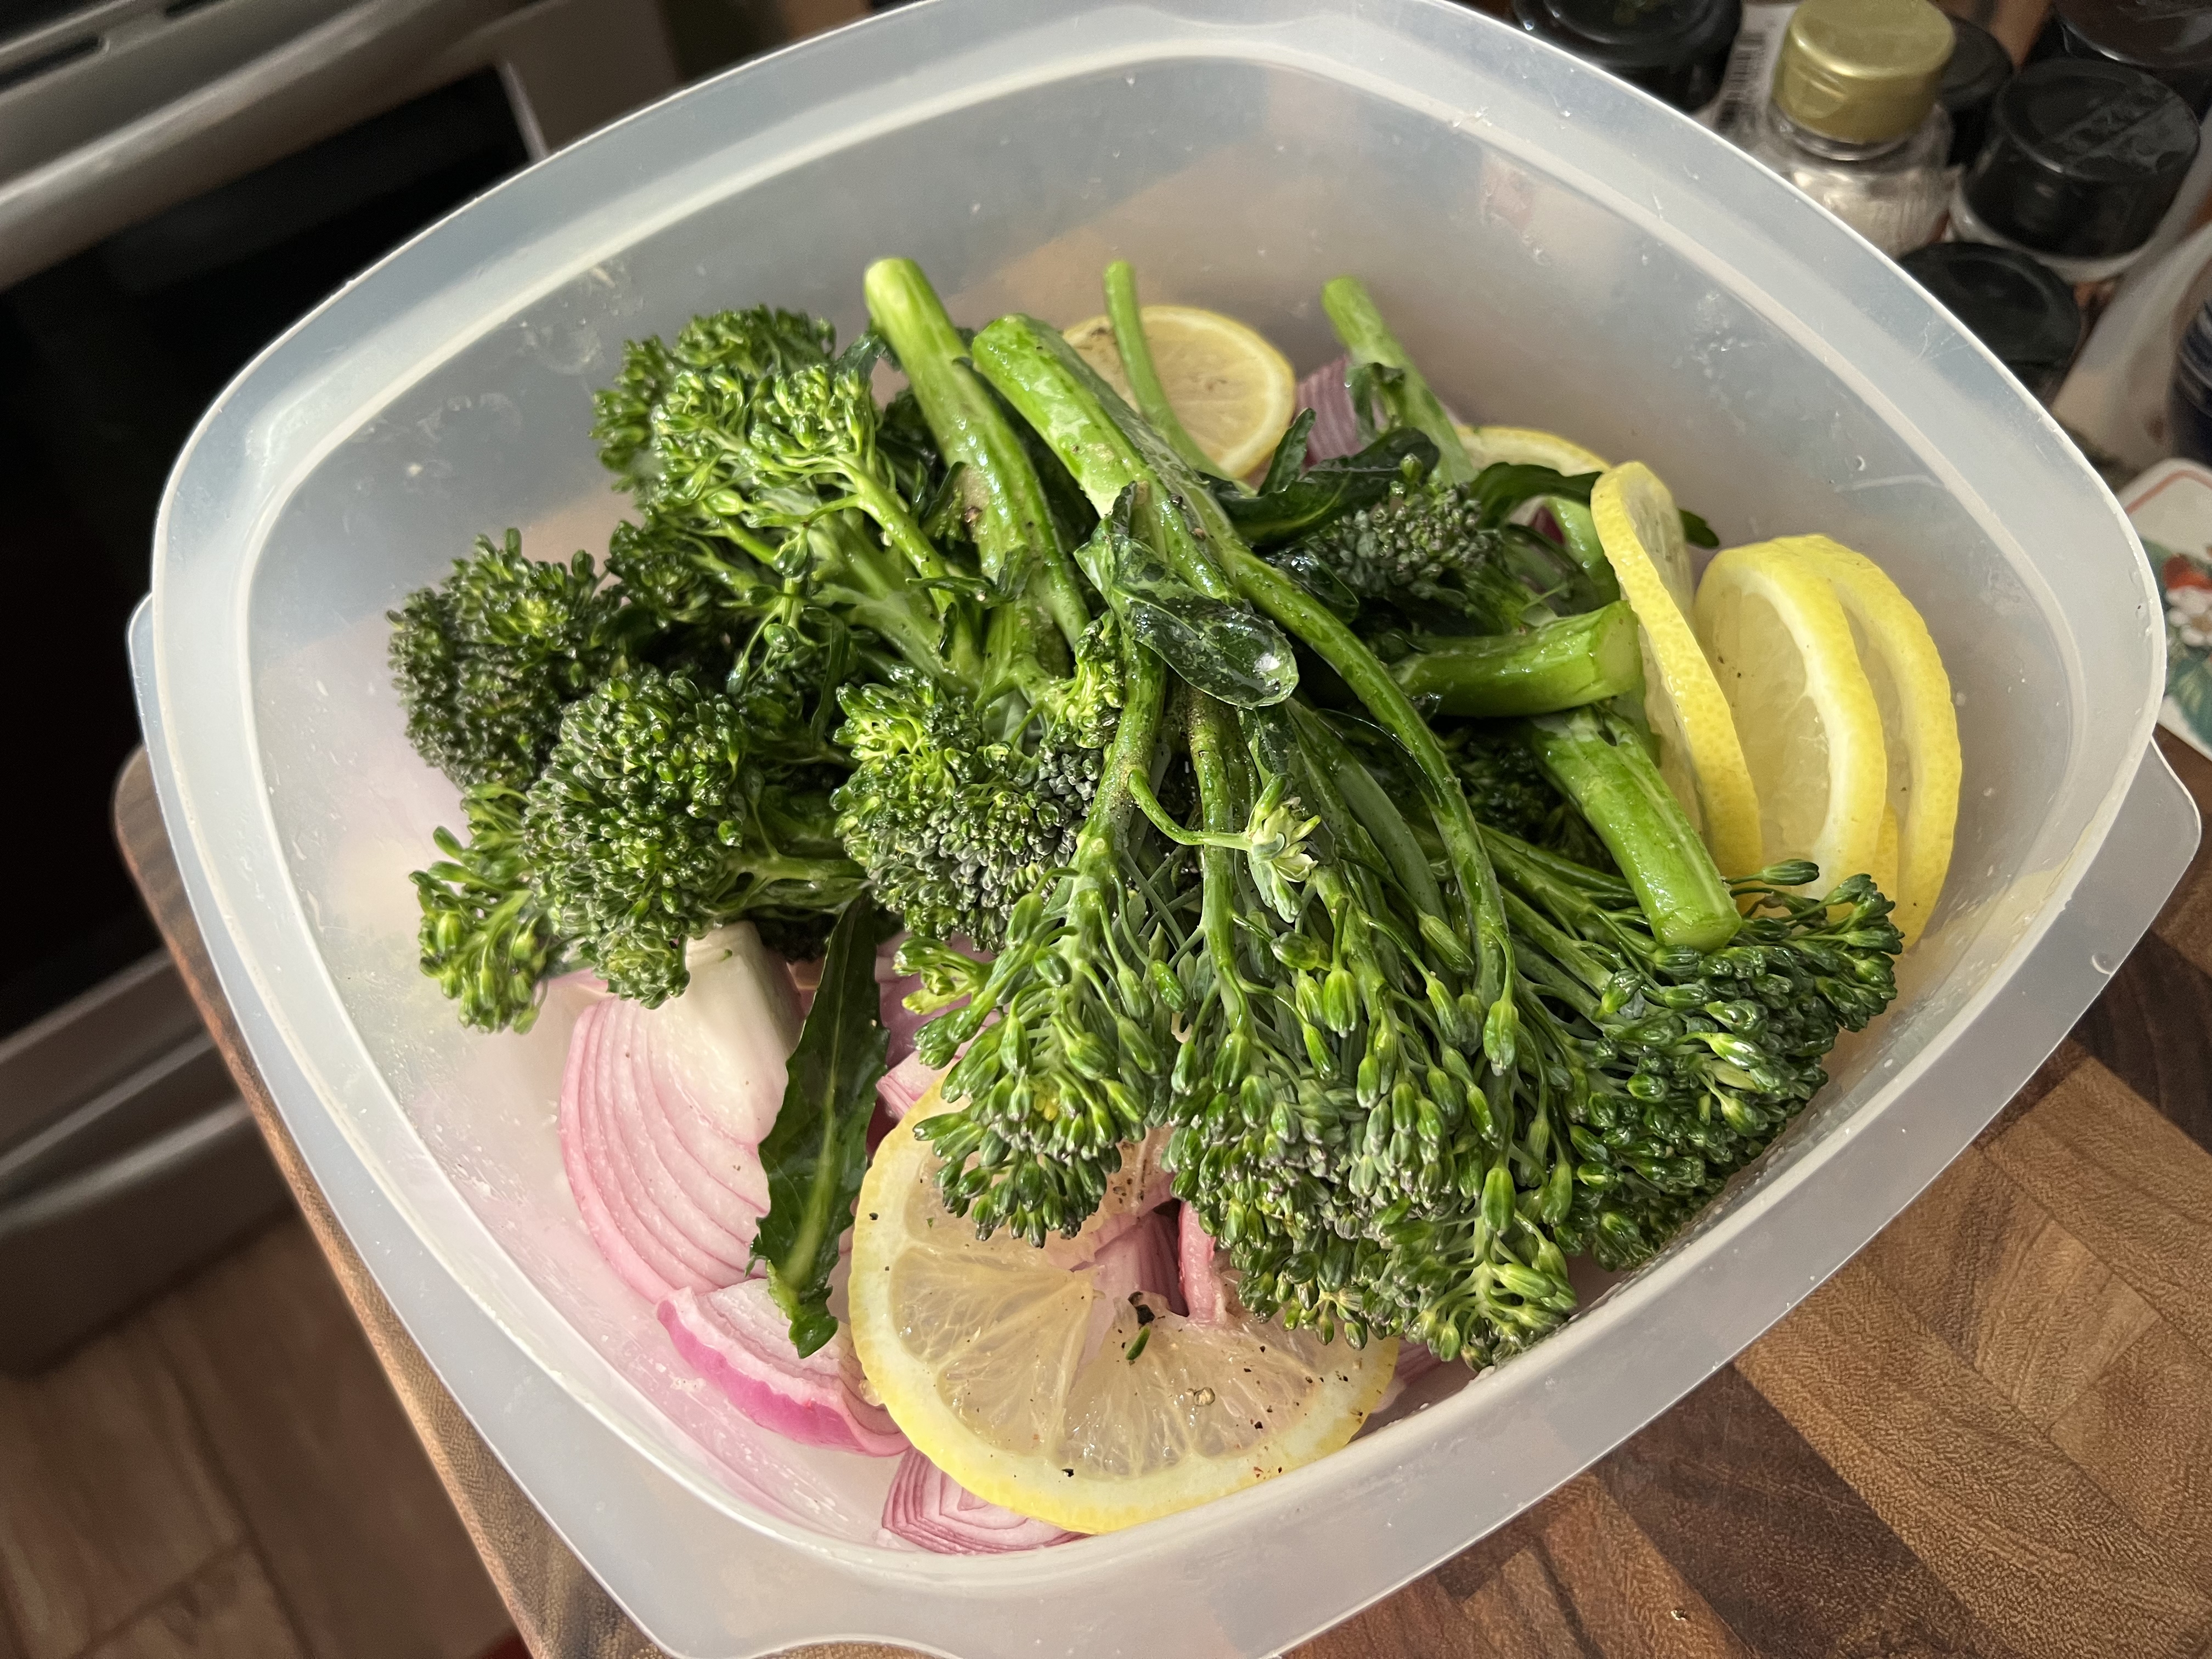 Lemon-Rosemary Roasted Chicken With Broccolini